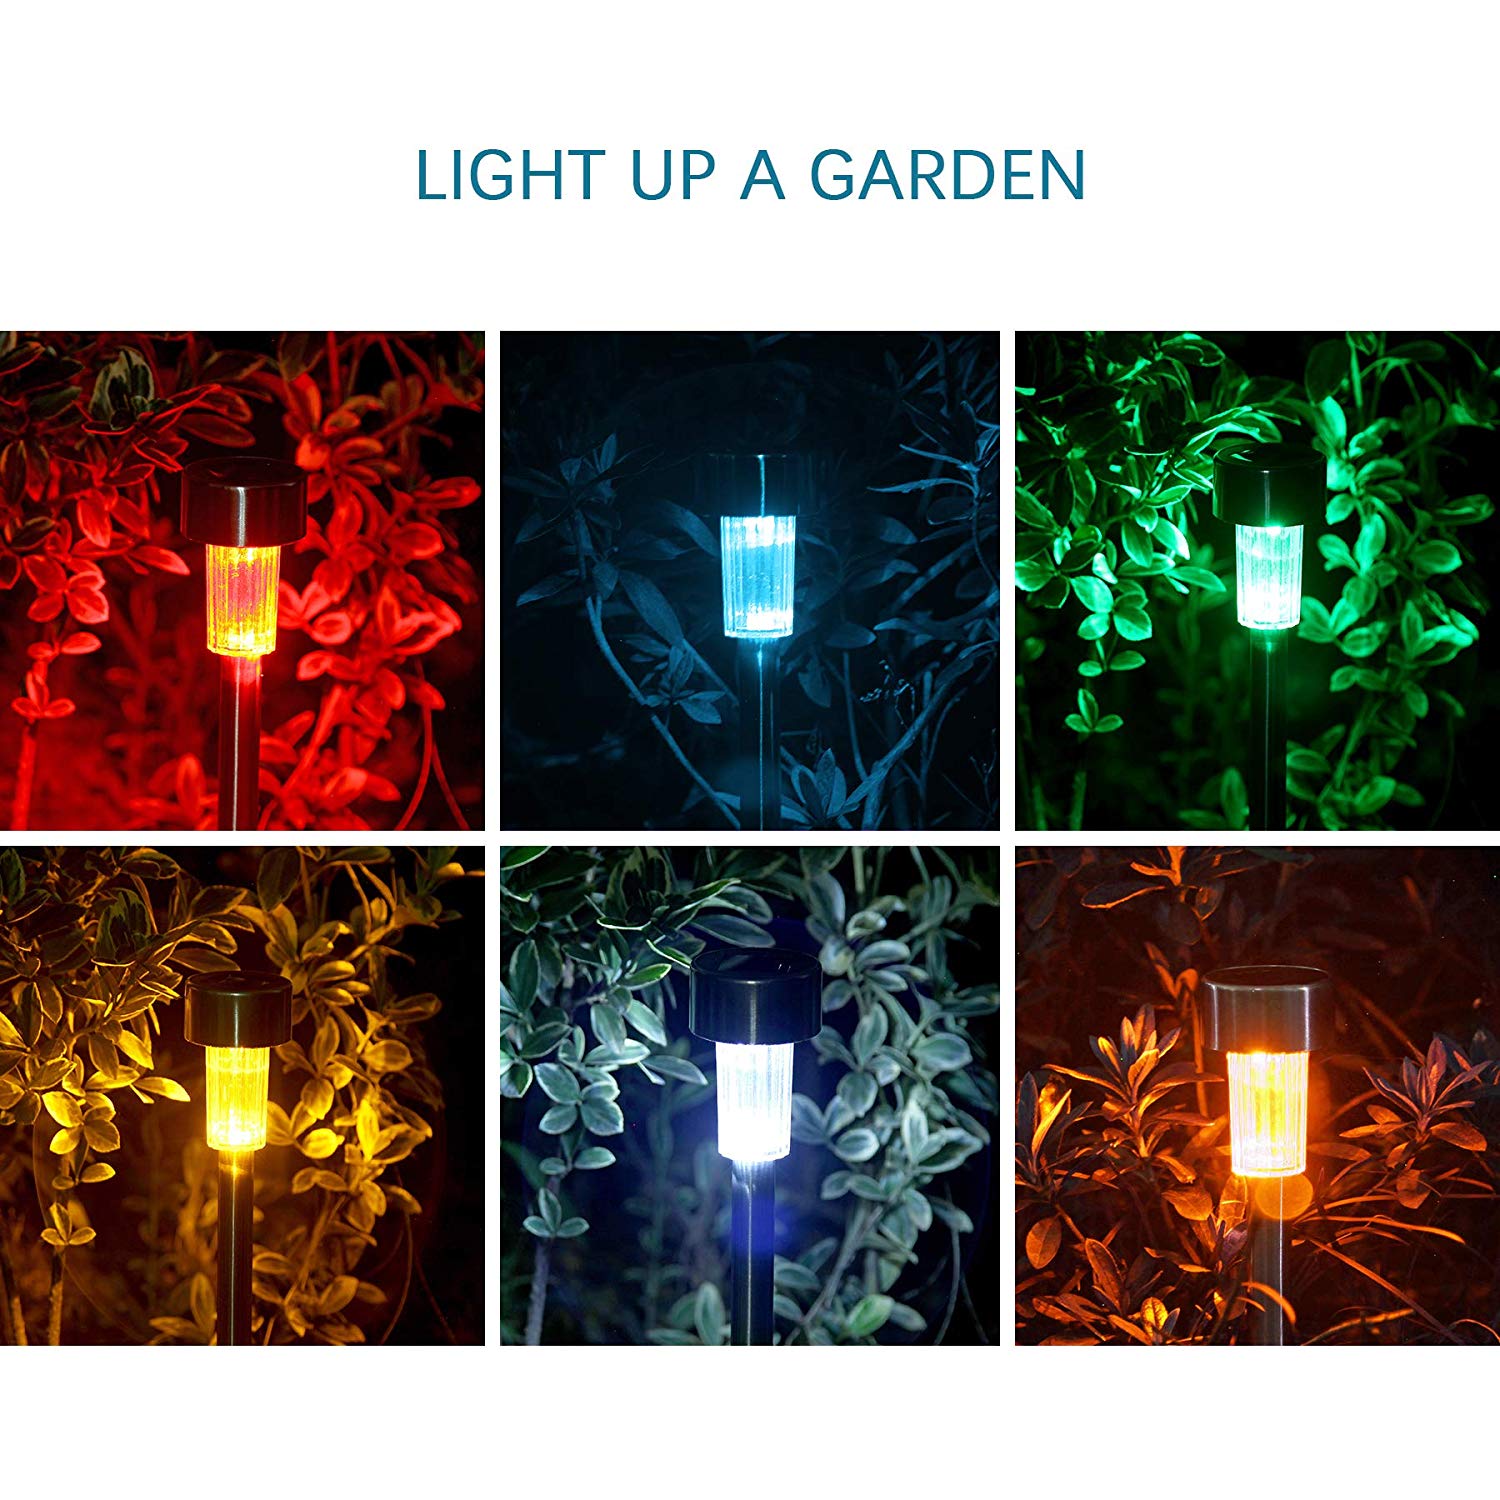 Solar Garden Lights Outdoor 12 Pack, LED Solar Powered Pathway Lights, Stainless Steel Landscape Lighting for Lawn, Patio, Yard, Walkway, Driveway (12 Pack Color) - image 3 of 8